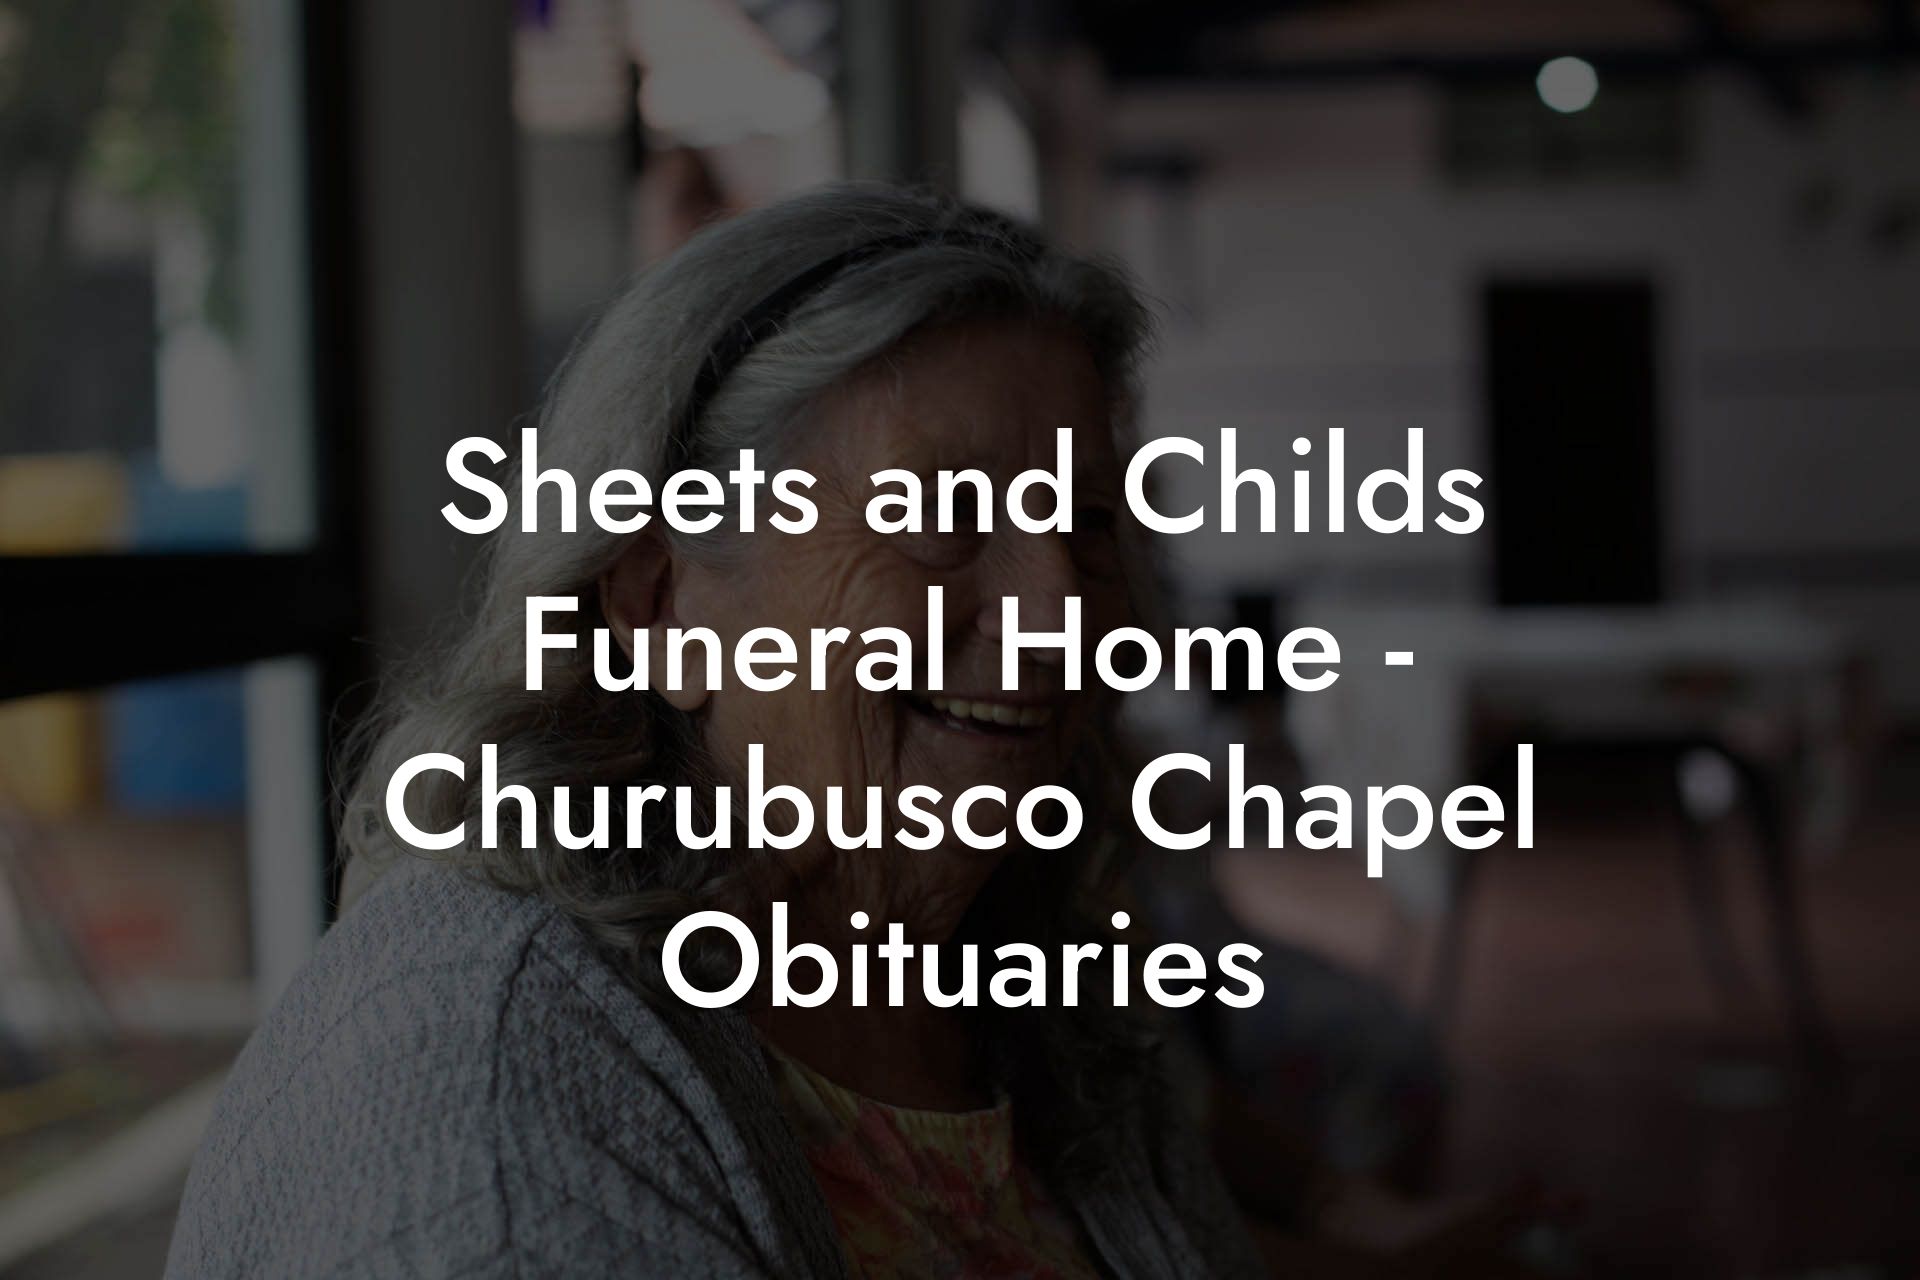 Sheets and Childs Funeral Home - Churubusco Chapel Obituaries